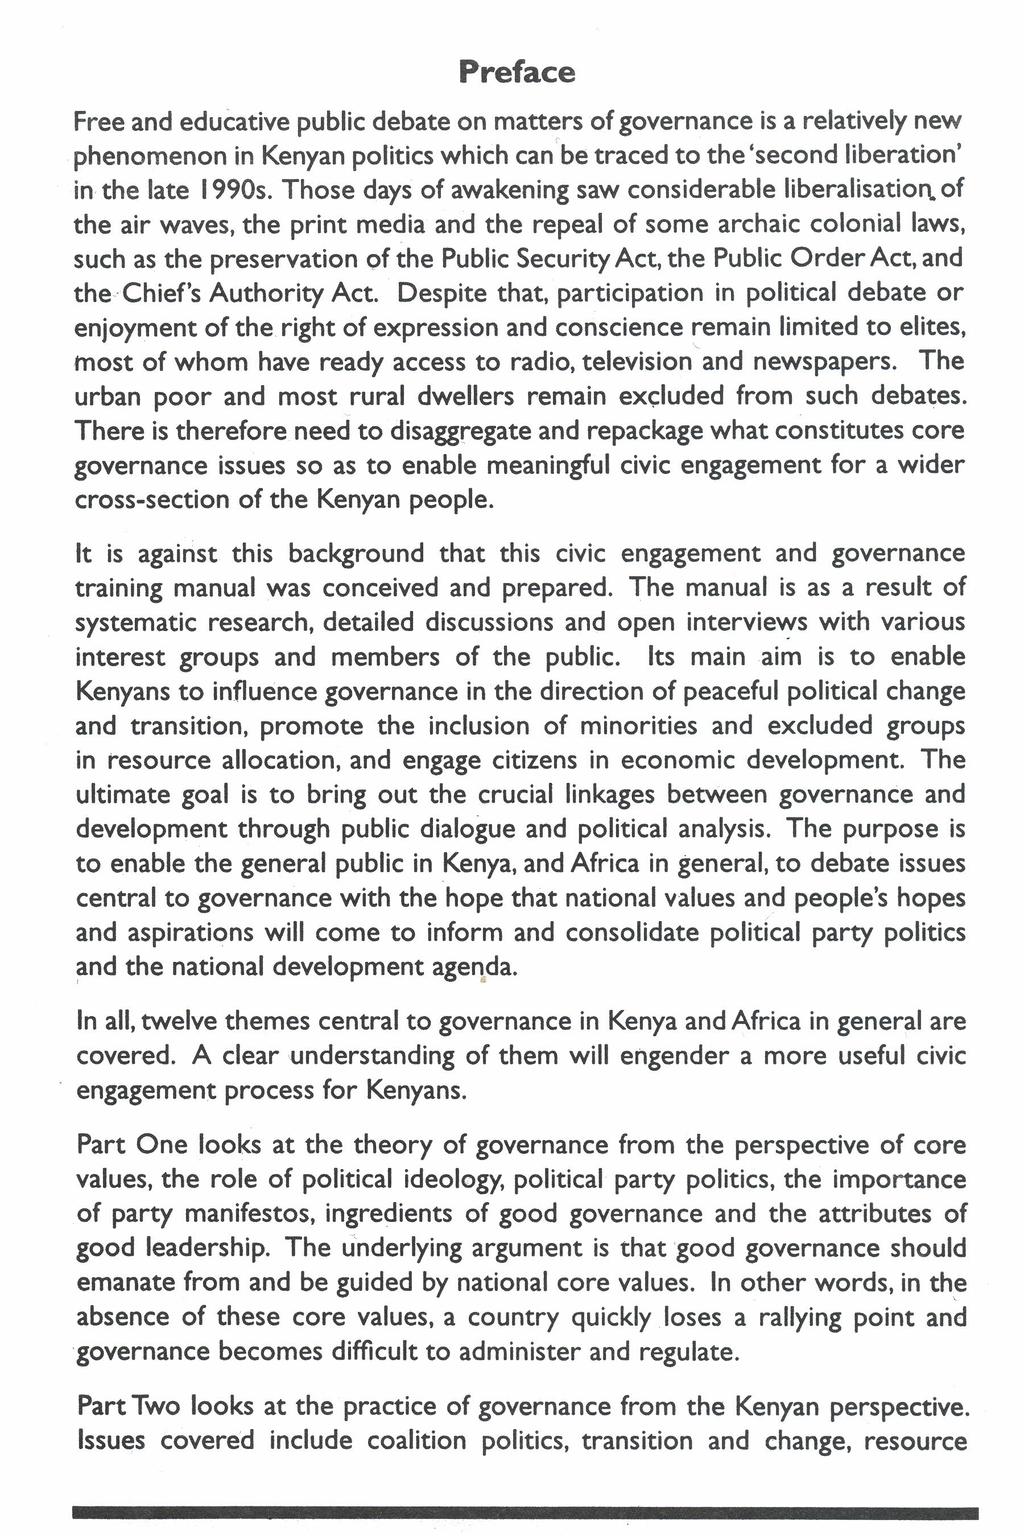 Preface Free and educative public debate on matters of governance is a relatively new phenomenon in Kenyan politics which can' be traced to the 'second liberation' in the late I990s.